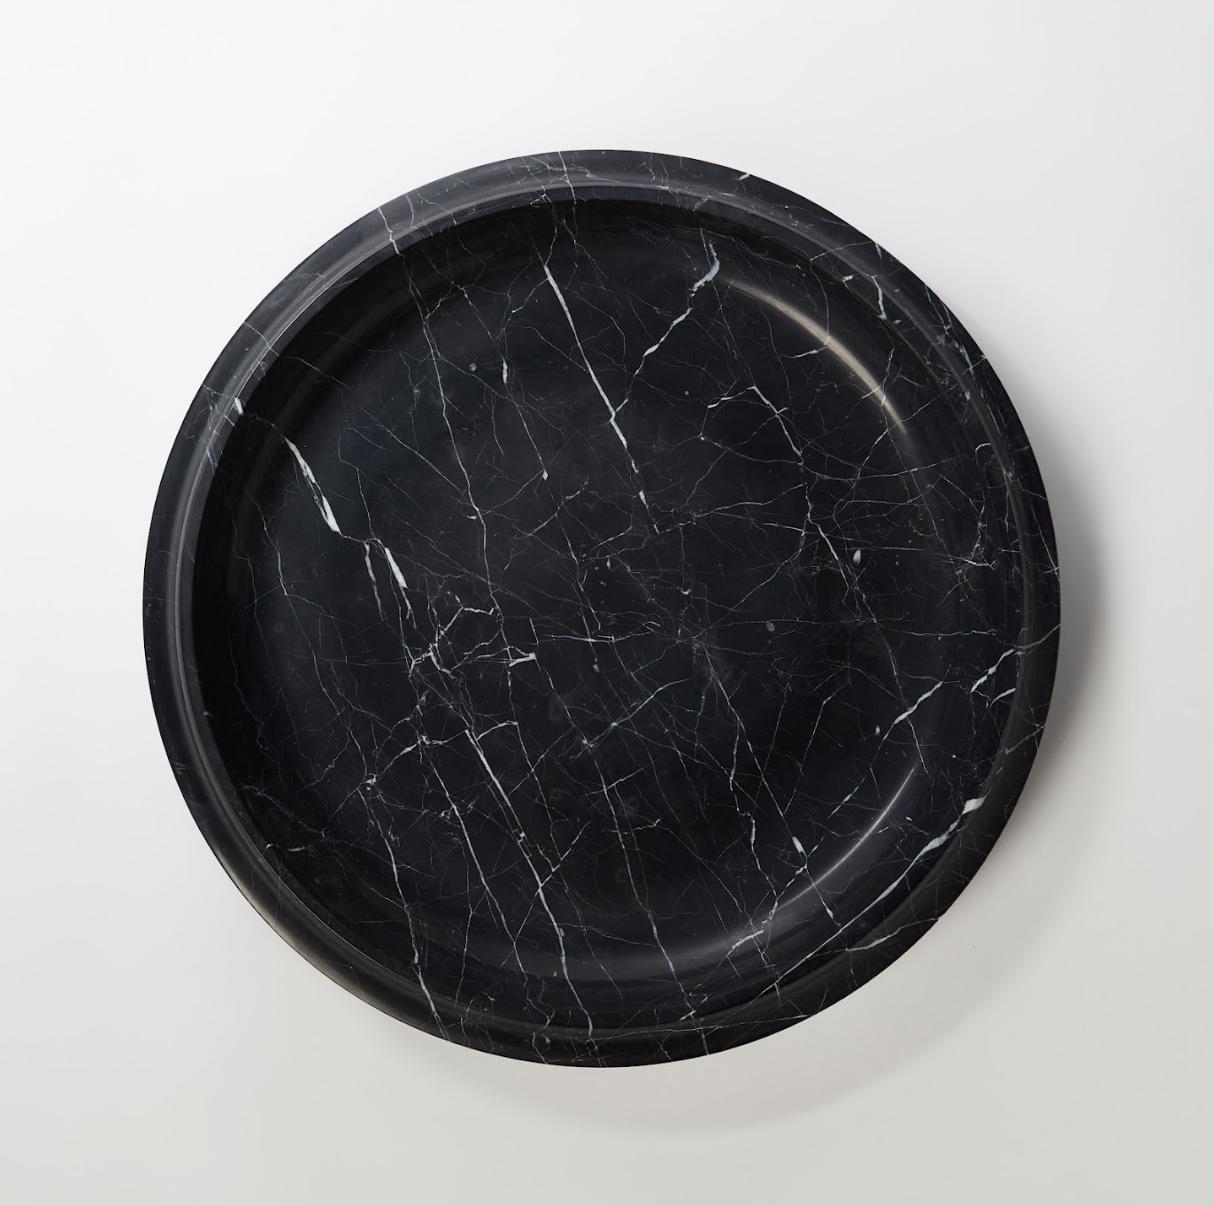 Unique nero marquina bowl 3 by Matthew Fisher
Unique piece
Dimensions: 45.7 D x 7.6 H cm
Materials: Nero marquina

Sitting softly upon an elongated curved base, the column of the object terminates at a lip detailed to catch light. Carved from